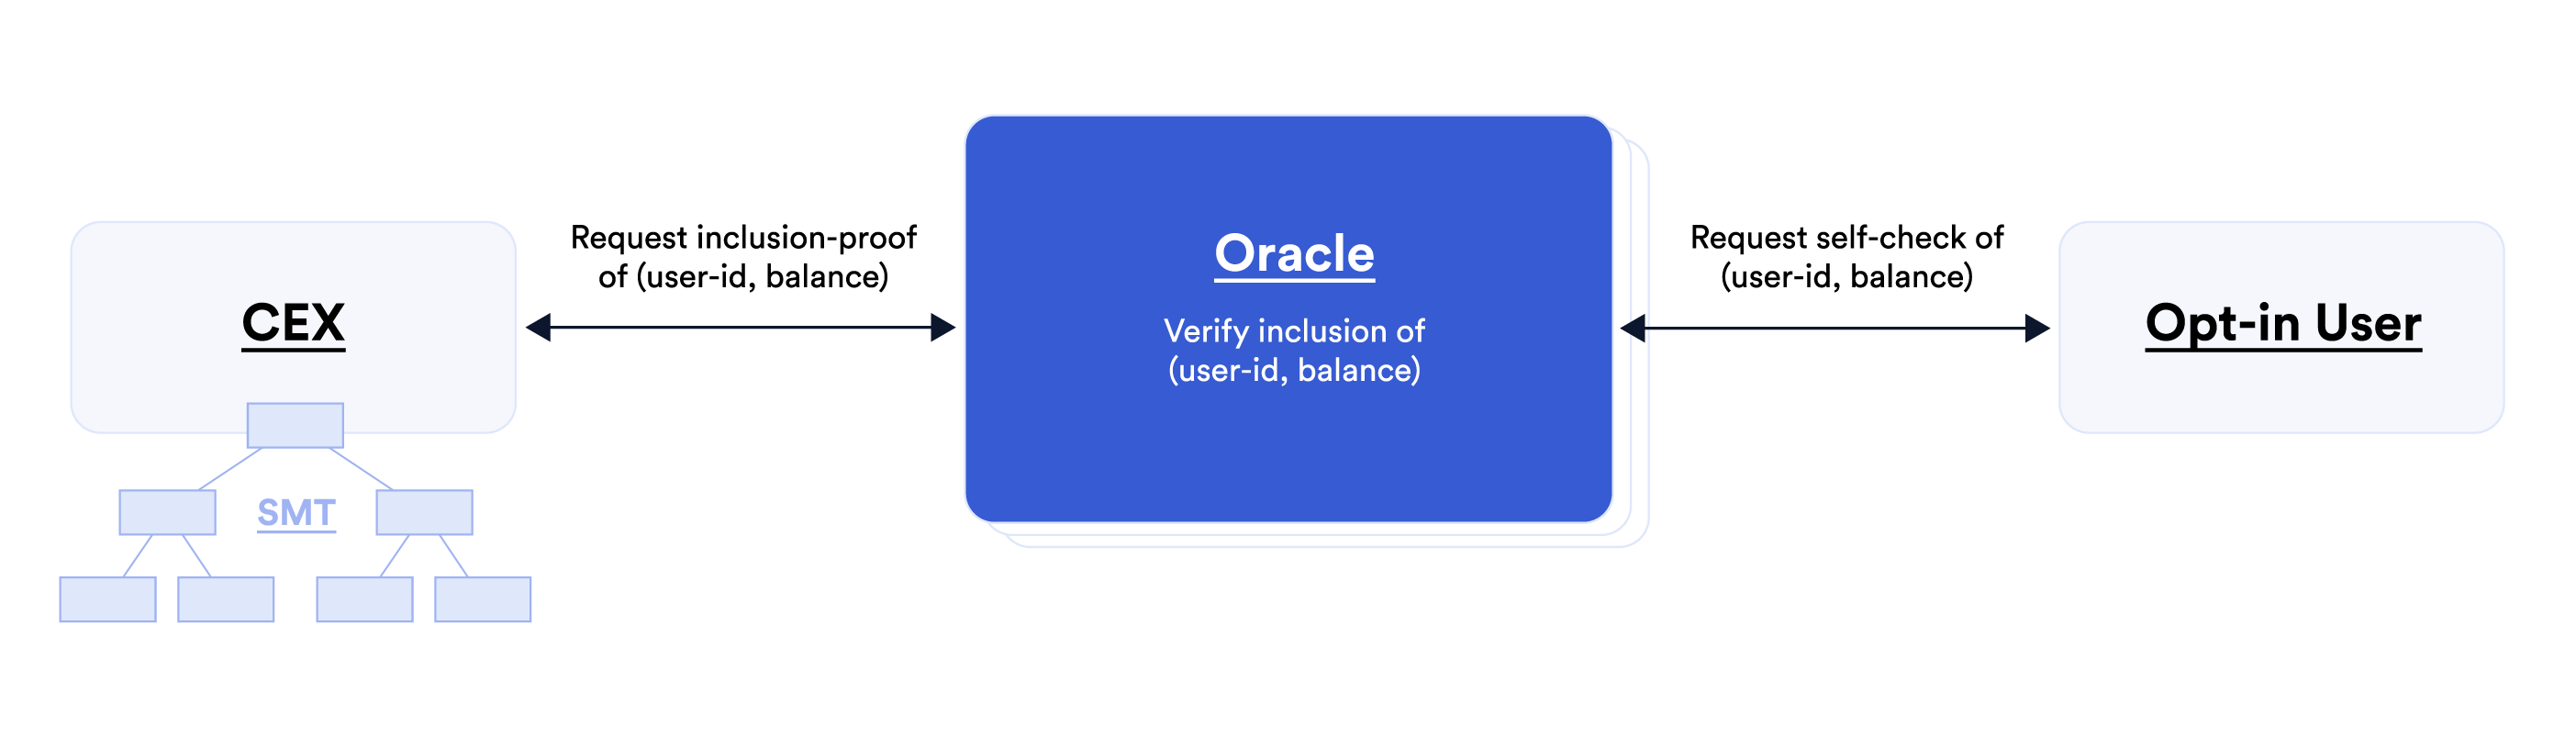 A diagram showing how oracles can help orchestrate inclusion self-checks on behalf of end users. 